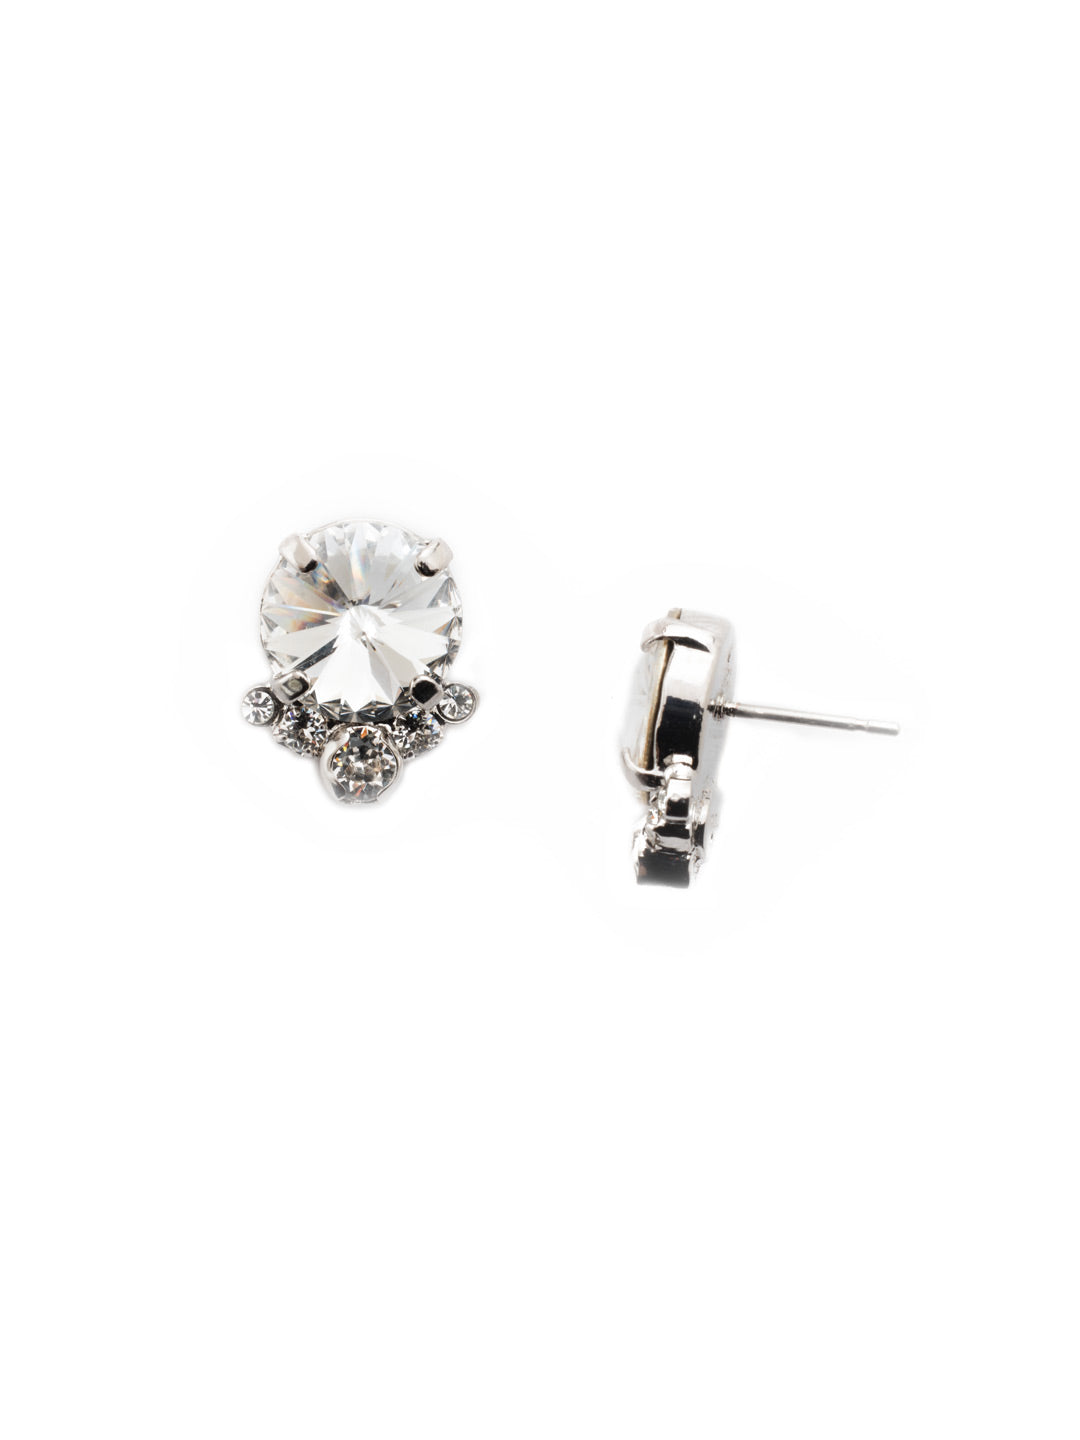 Regal Rounds Stud Earrings - EDH98RHCRY - <p>A large center stone sits atop five petite rounds for a chic, classic look. From Sorrelli's Crystal collection in our Palladium Silver-tone finish.</p>